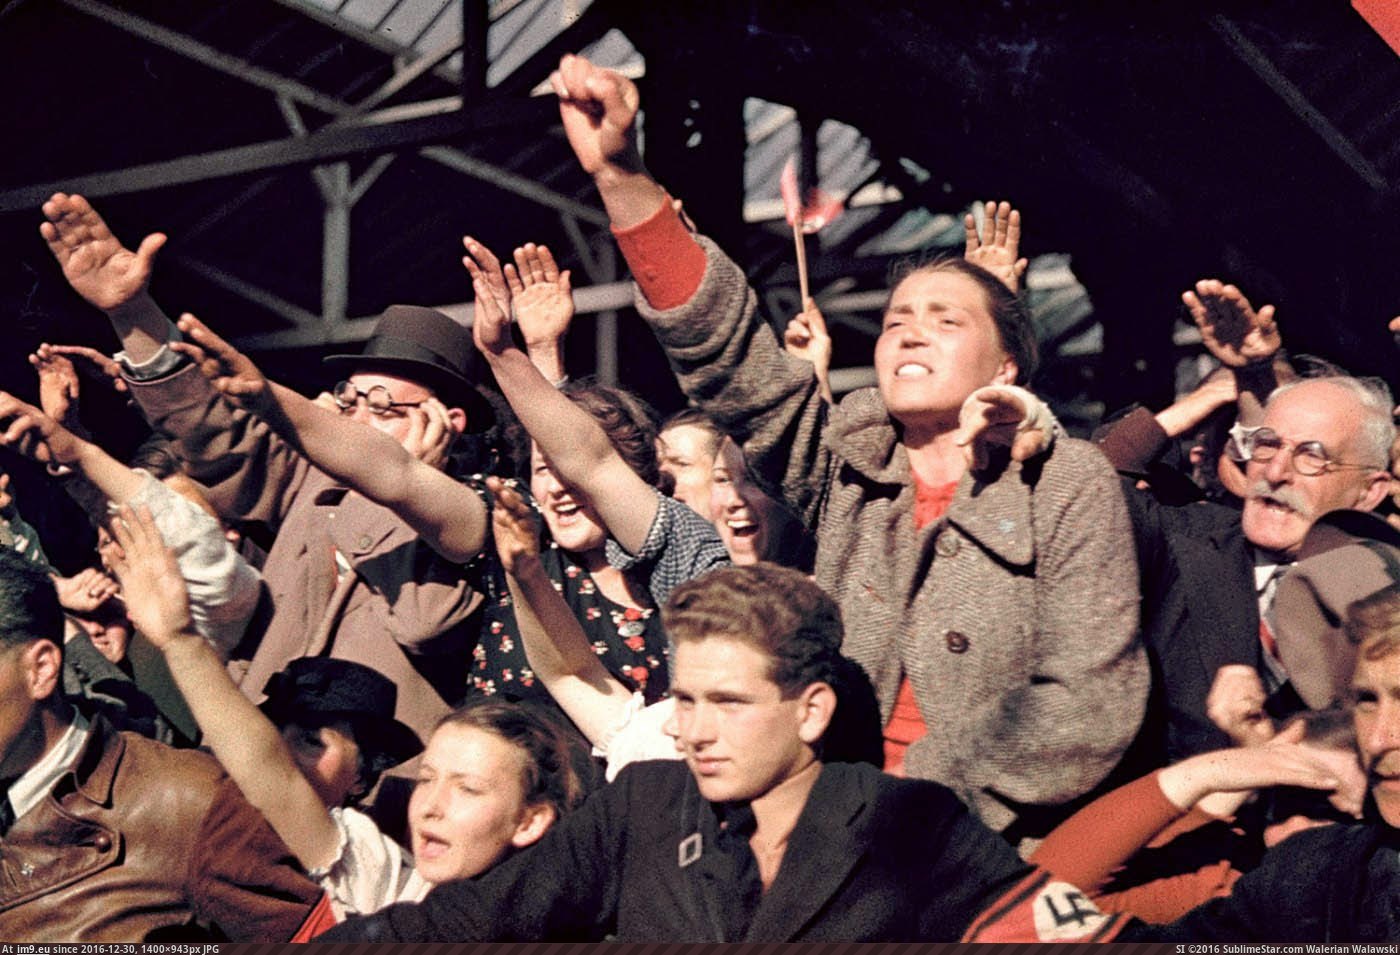 Crowds cheering Adolf Hitler’s campaign to unite Austria and Germany, 1938. (in Restored Photos of Nazi Germany)